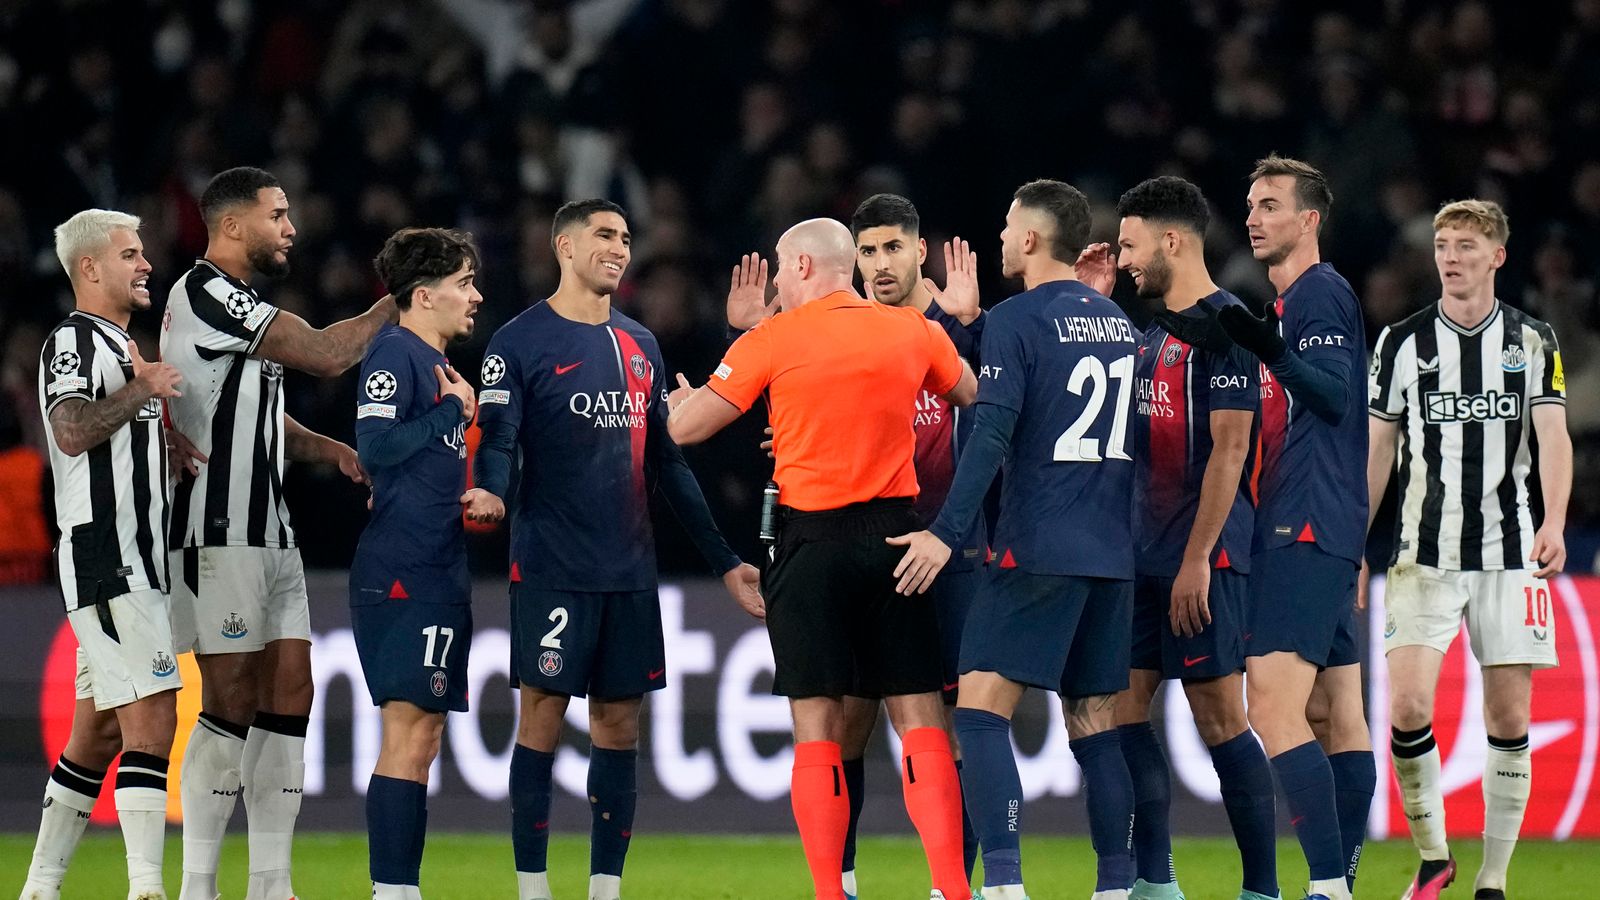 Champions League VAR official stood down after controversial penalty against Newcastle in PSG match